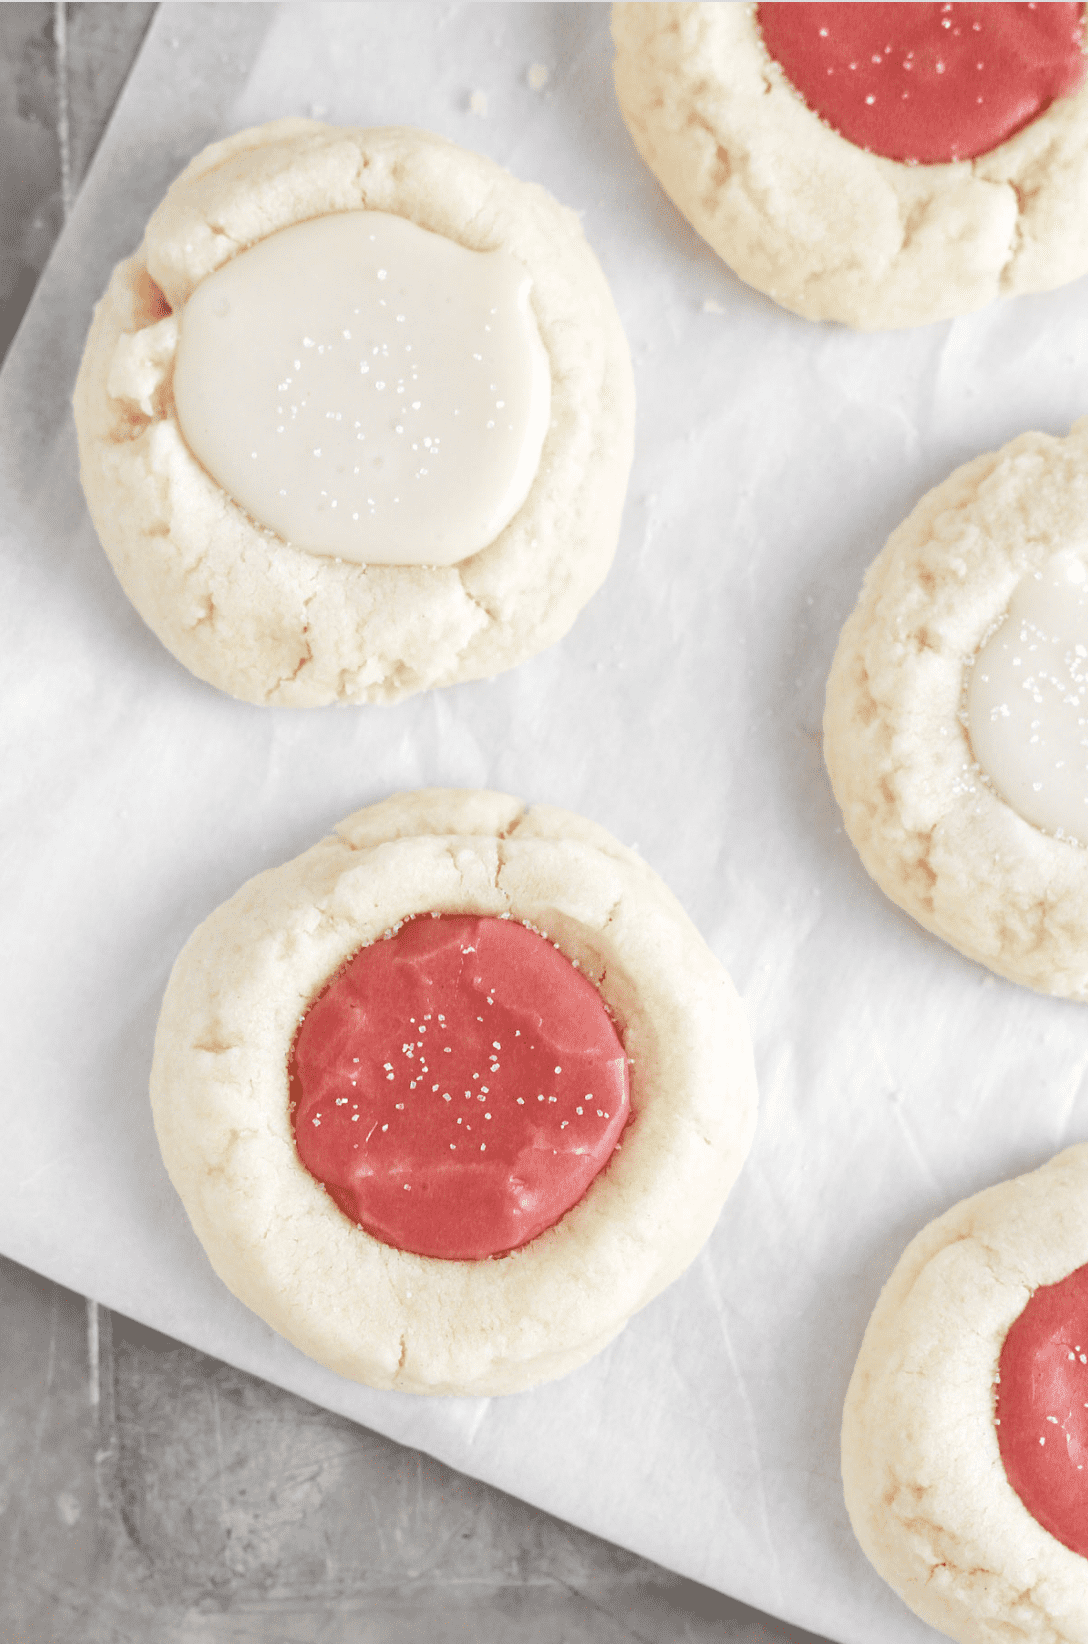 An overhead view of vegan thumbprint cookies with white and red icing in the center.